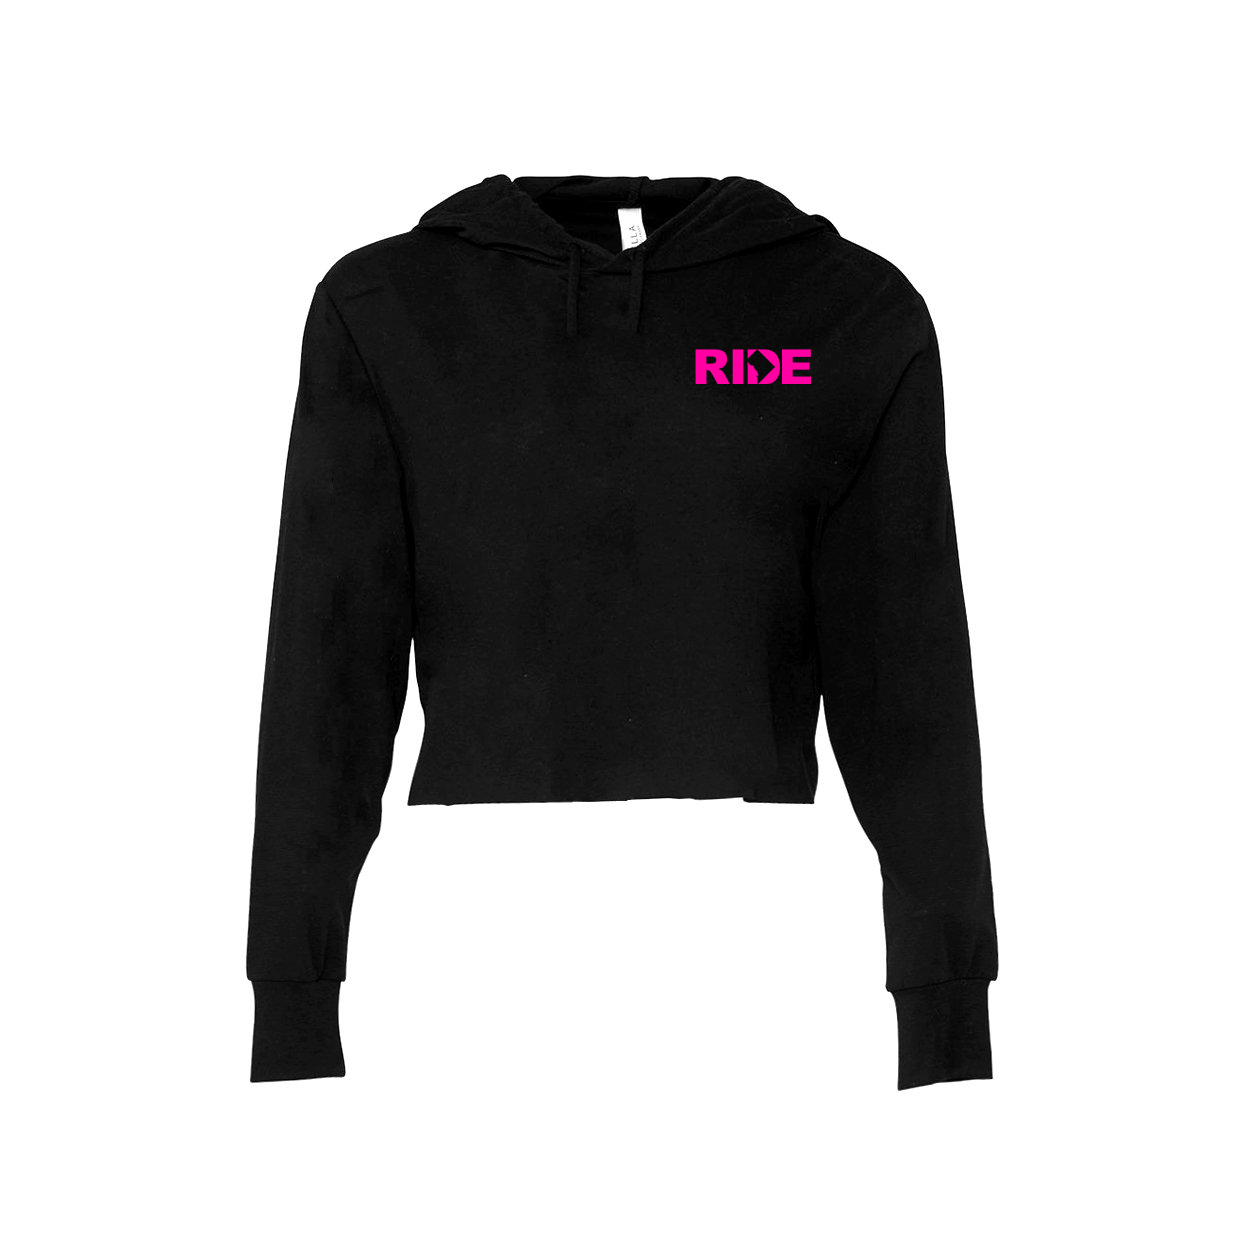 Ride District of Columbia Night Out Womens Cropped Sweatshirt Black (Pink Logo)